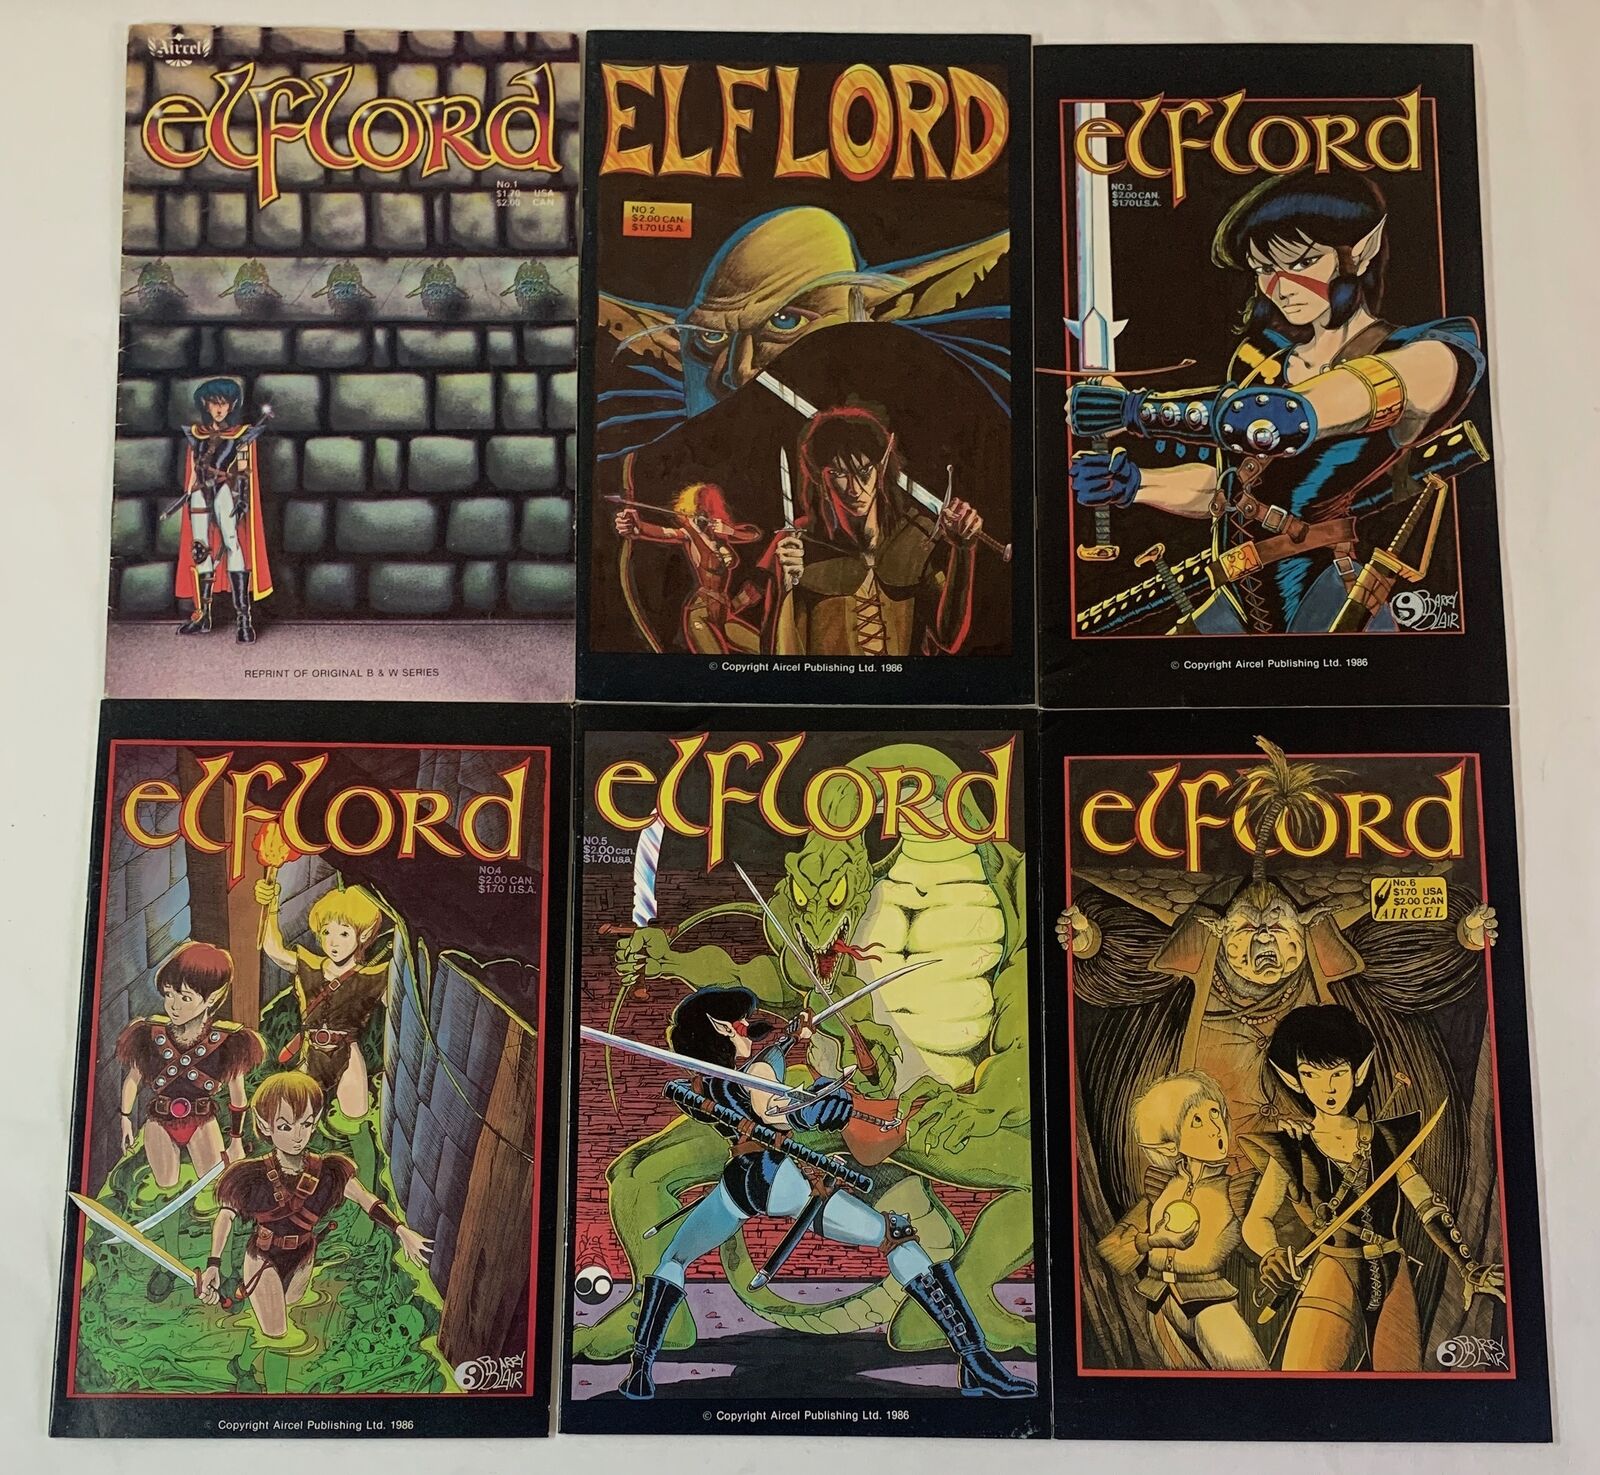 1986 Aircel ELFLORD V.1 #1 2 3 4 5 6 ~ FULL SET ~ lower to mid-grade